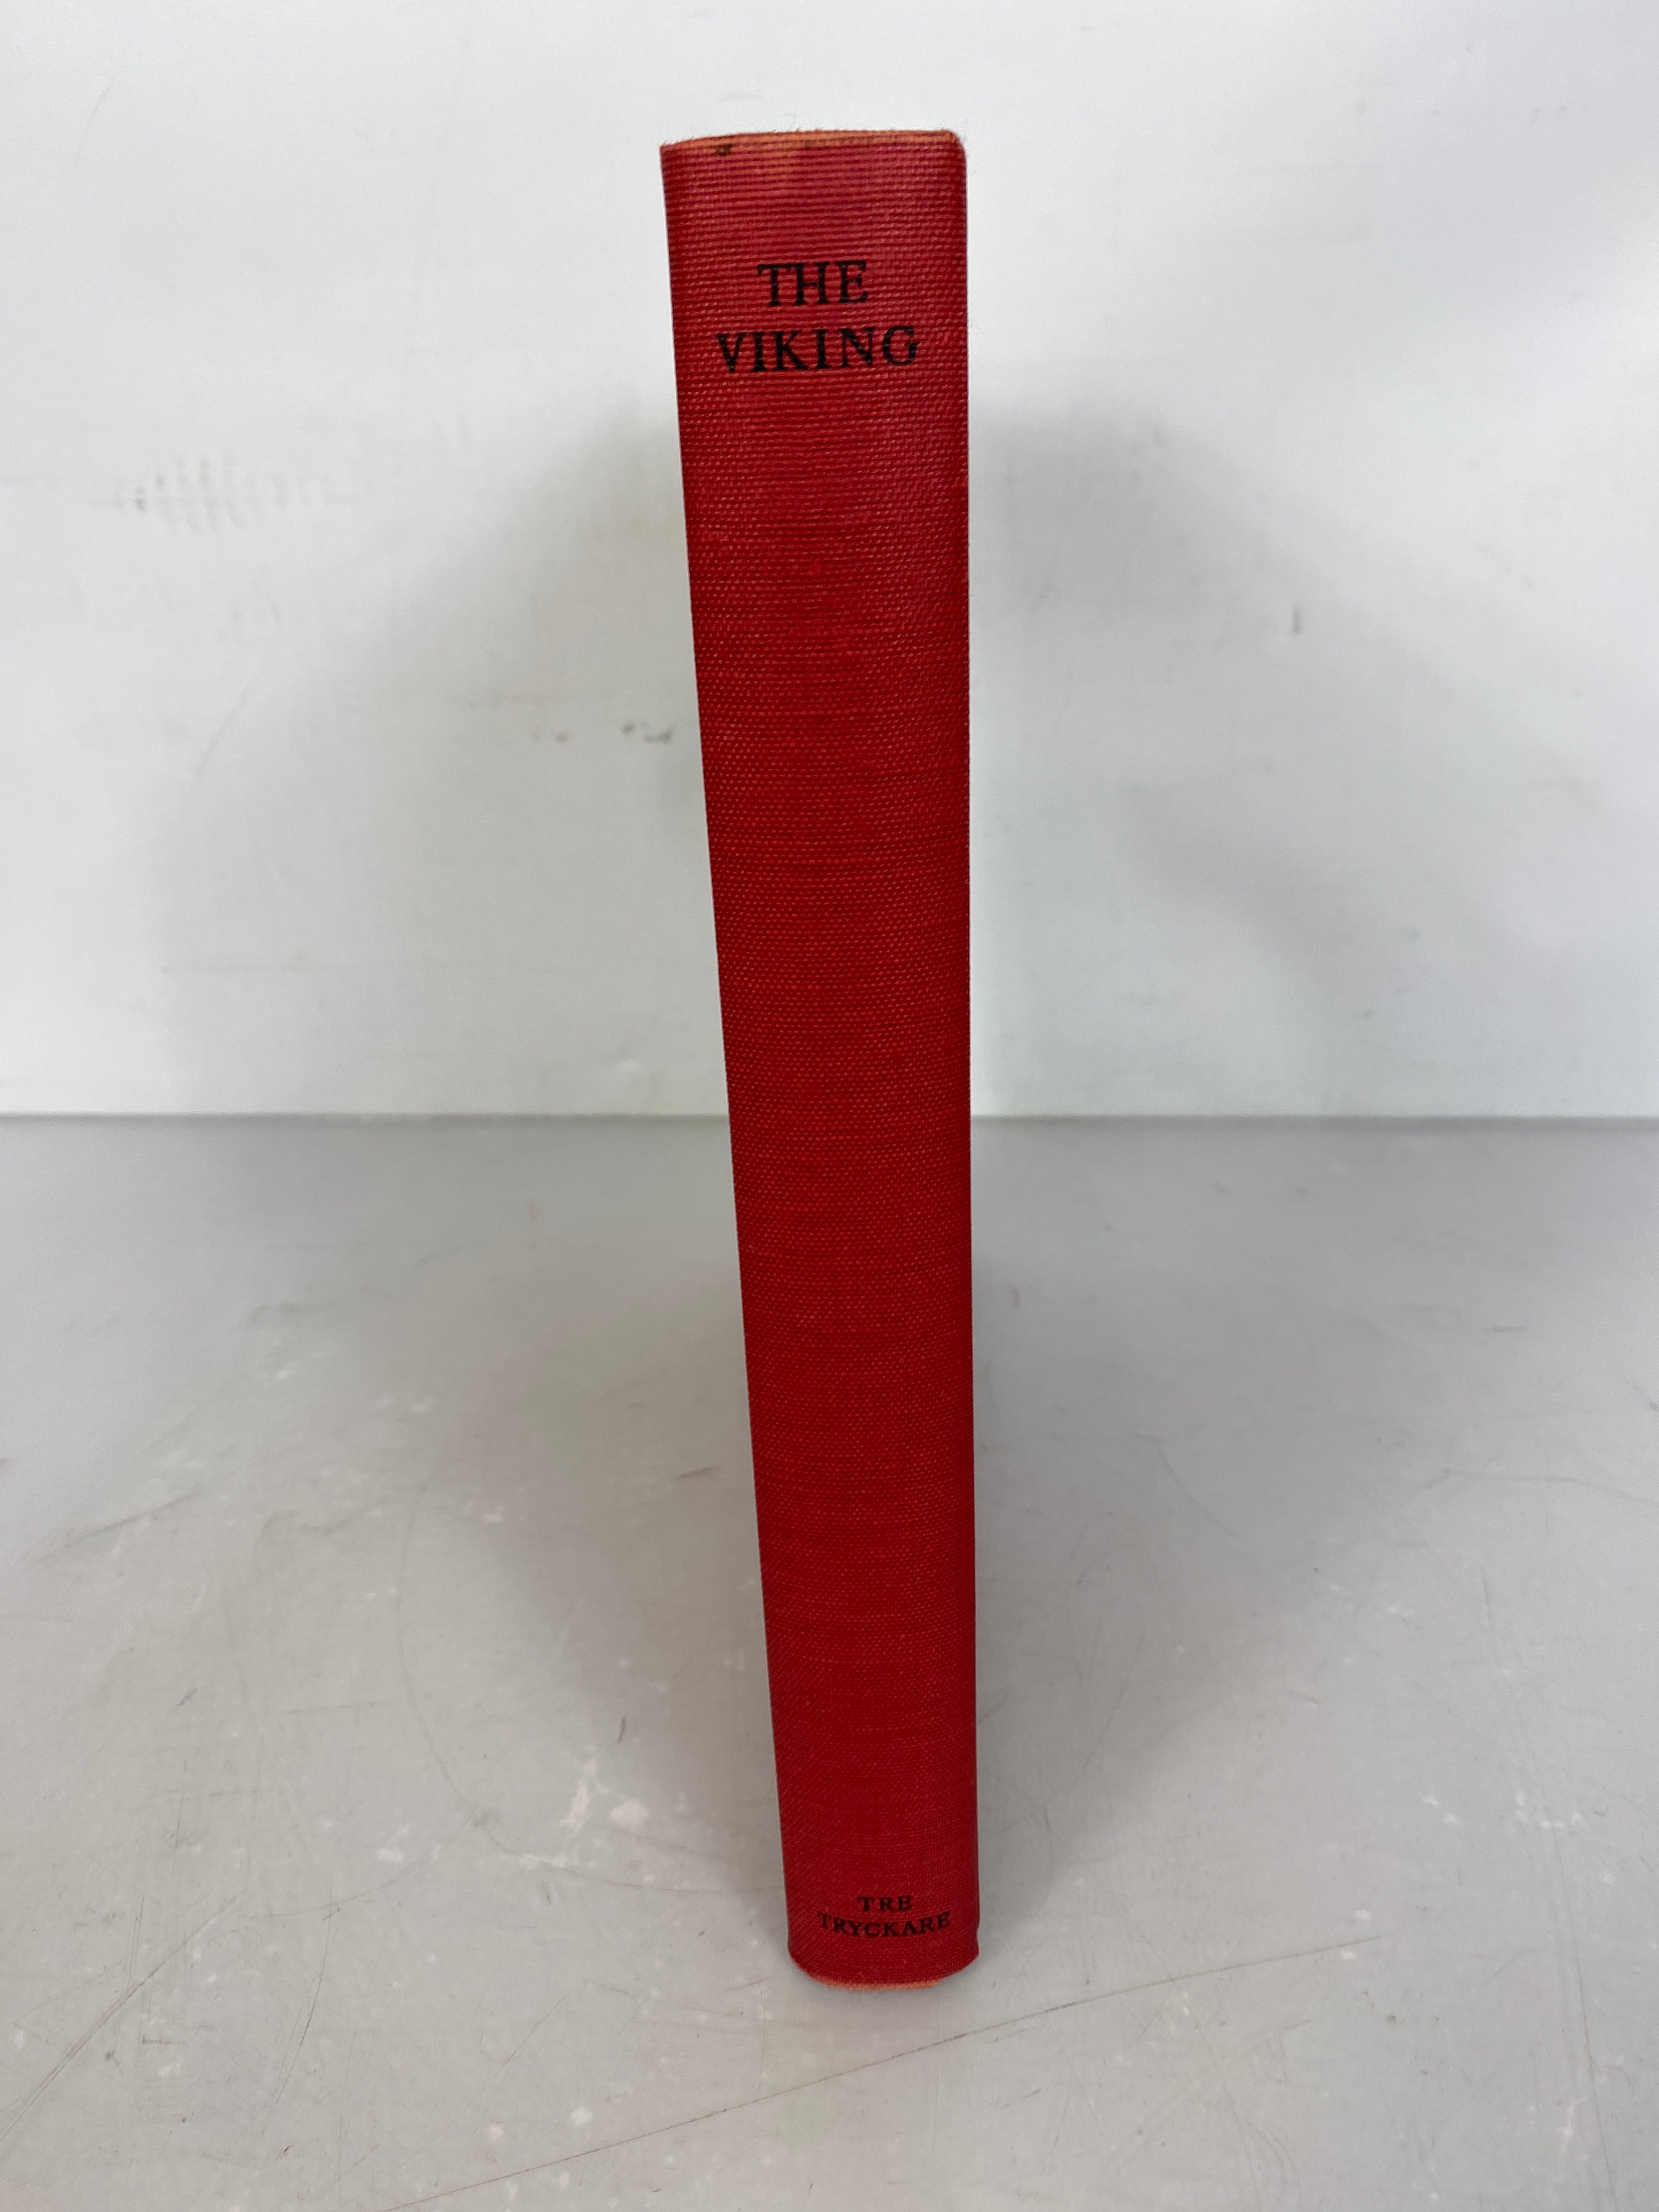 The Viking by Tre Tryckare 1966 with Slipcase HC DJ